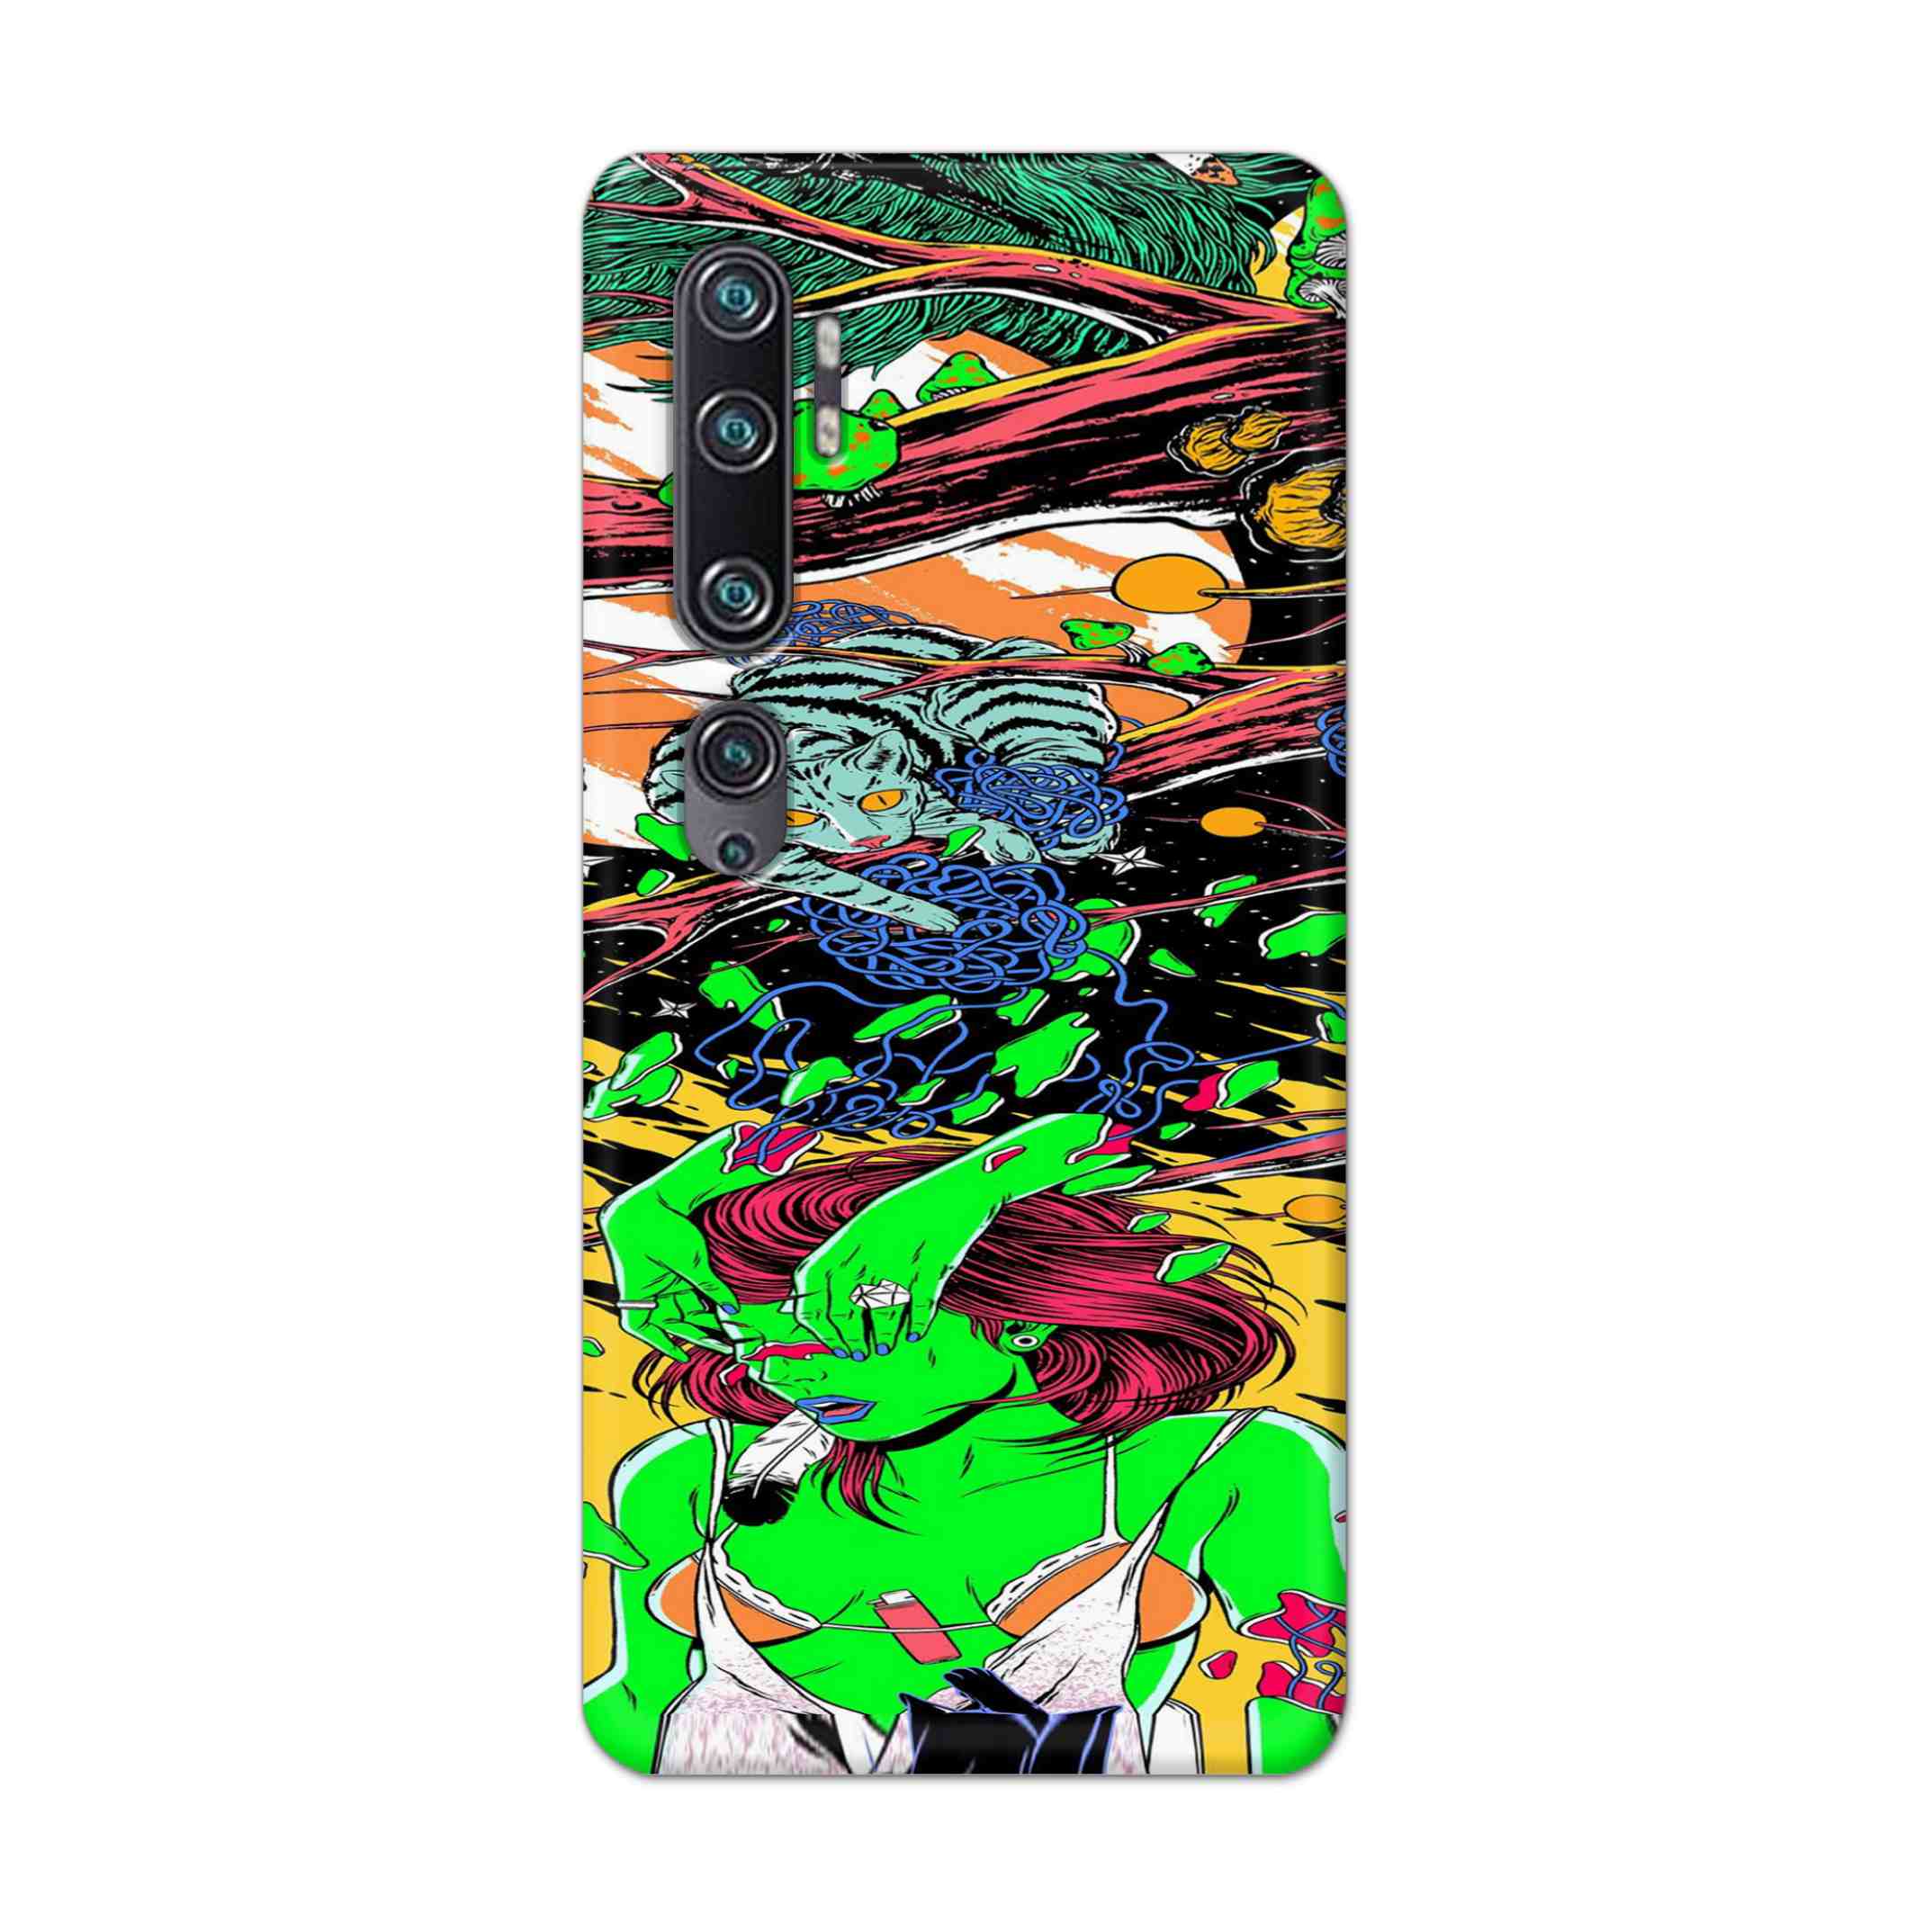 Buy Green Girl Art Hard Back Mobile Phone Case Cover For Xiaomi Mi Note 10 Online